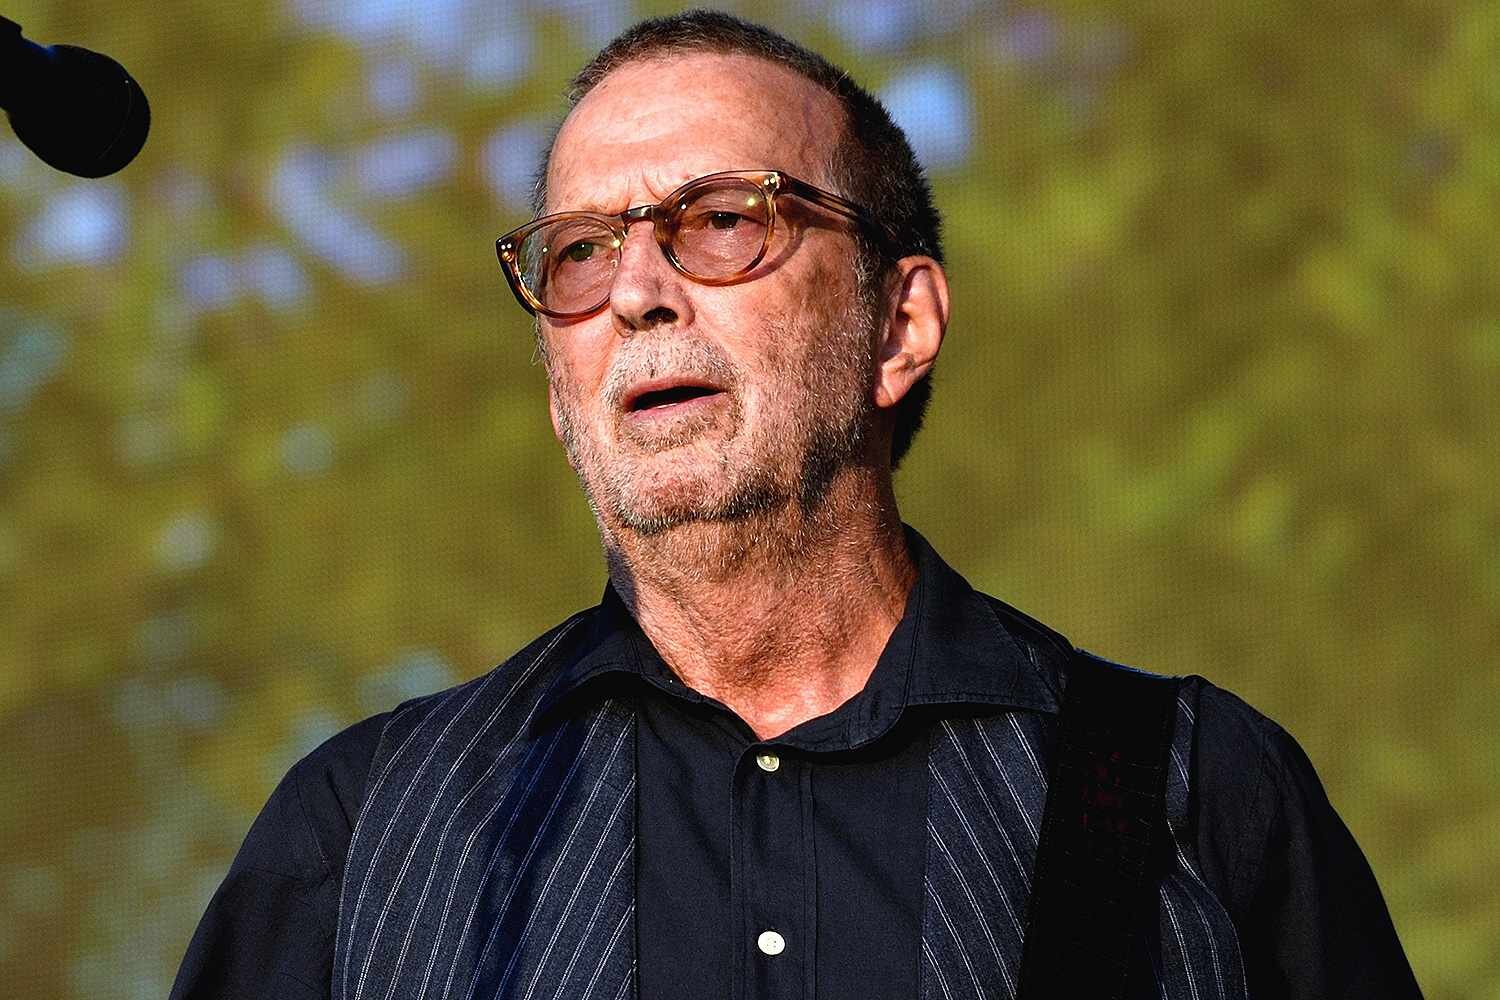 JUST IN: Eric clapton has taken a shocking decision about…